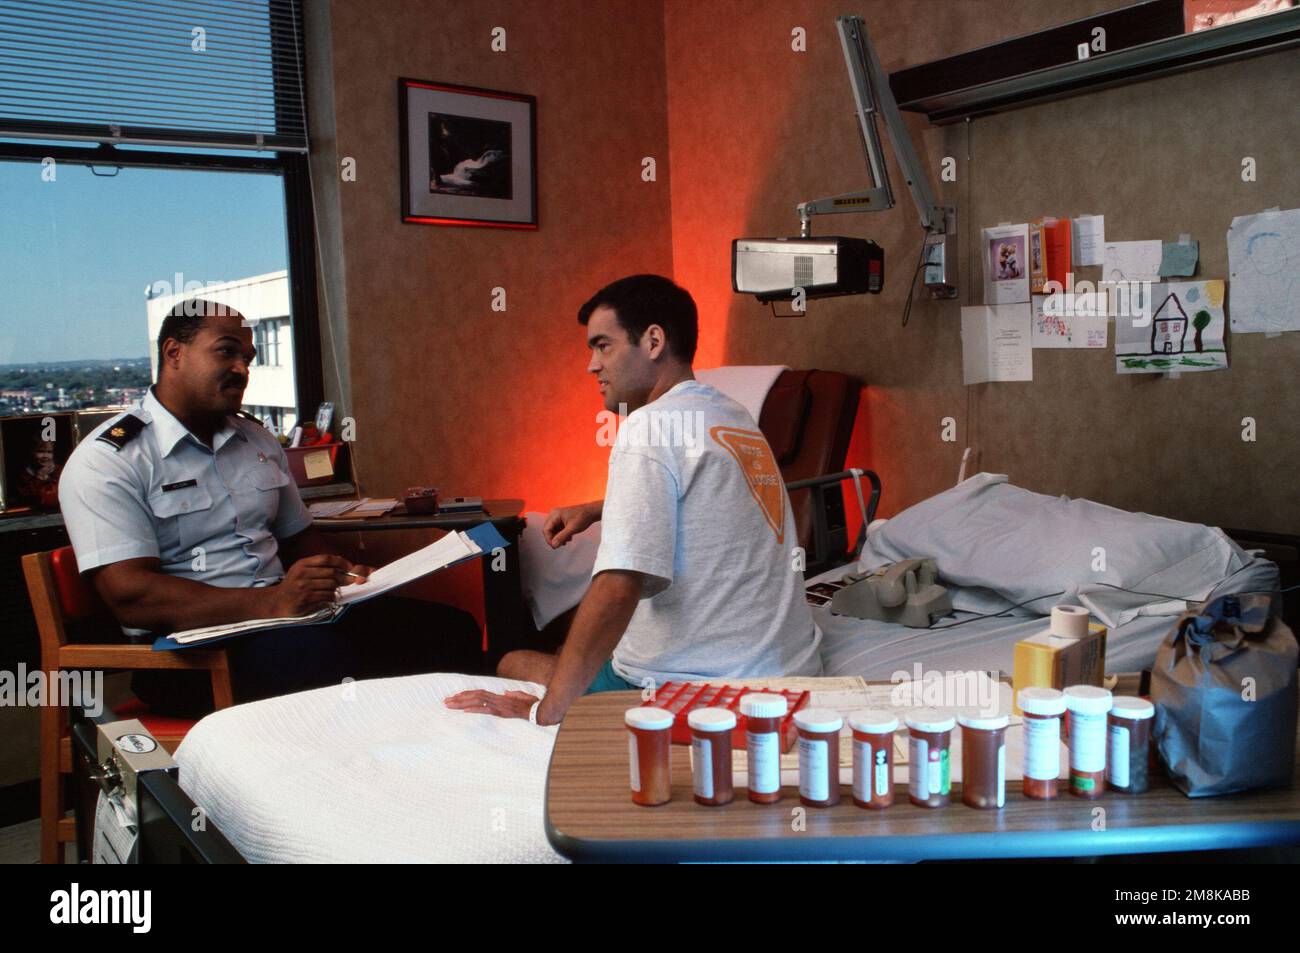 USAF Major Wilson, reviews health care options under the new military health care program 'TriCare' with his patient. From AIRMAN Magazine's May 1995 issue article 'Healthier People'. Country: Unknown Stock Photo